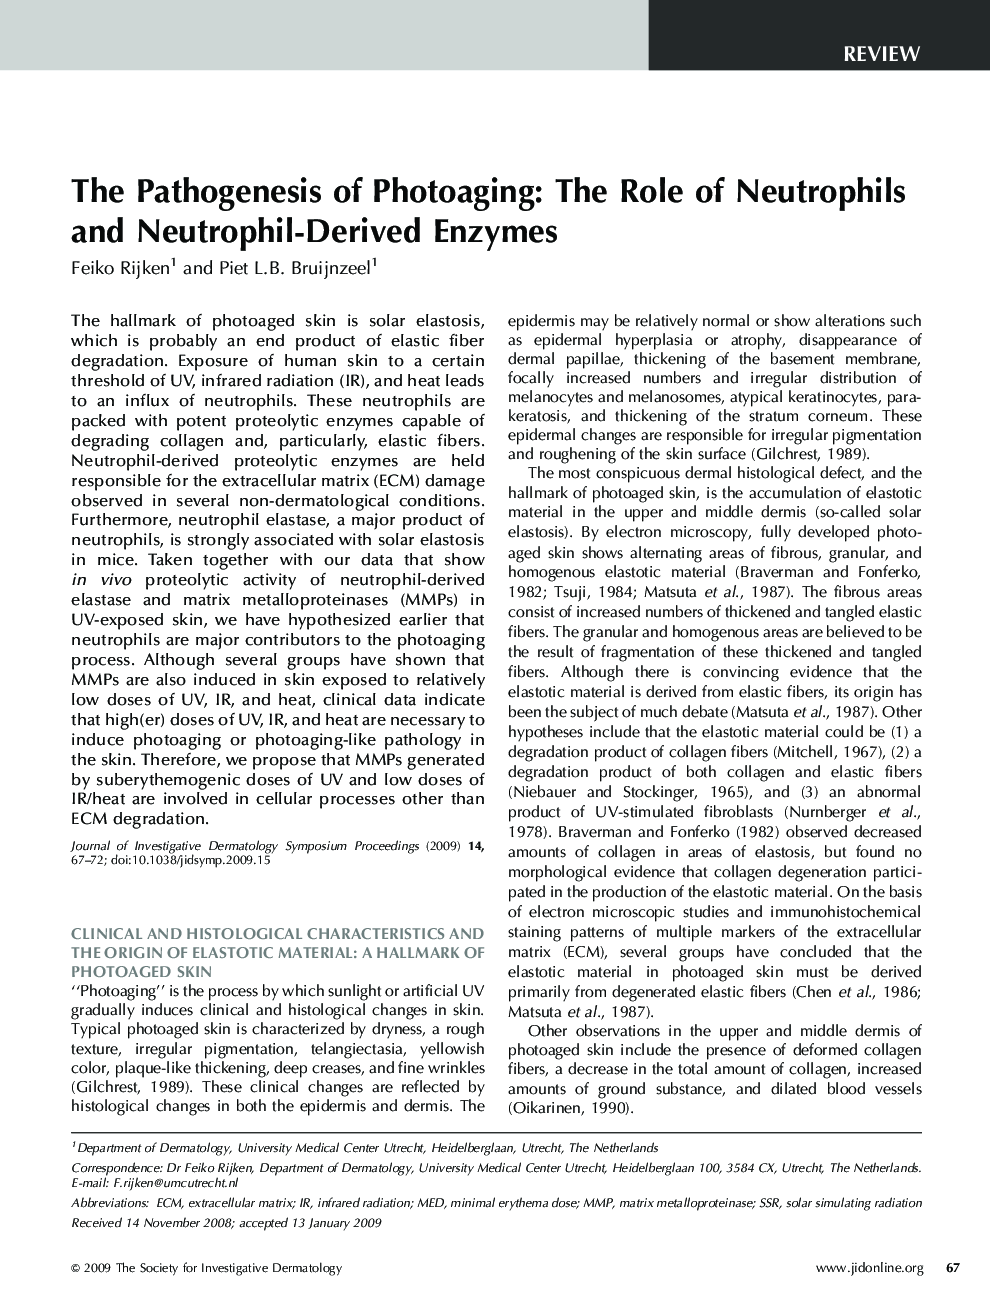 The Pathogenesis of Photoaging: The Role of Neutrophils and Neutrophil-Derived Enzymes